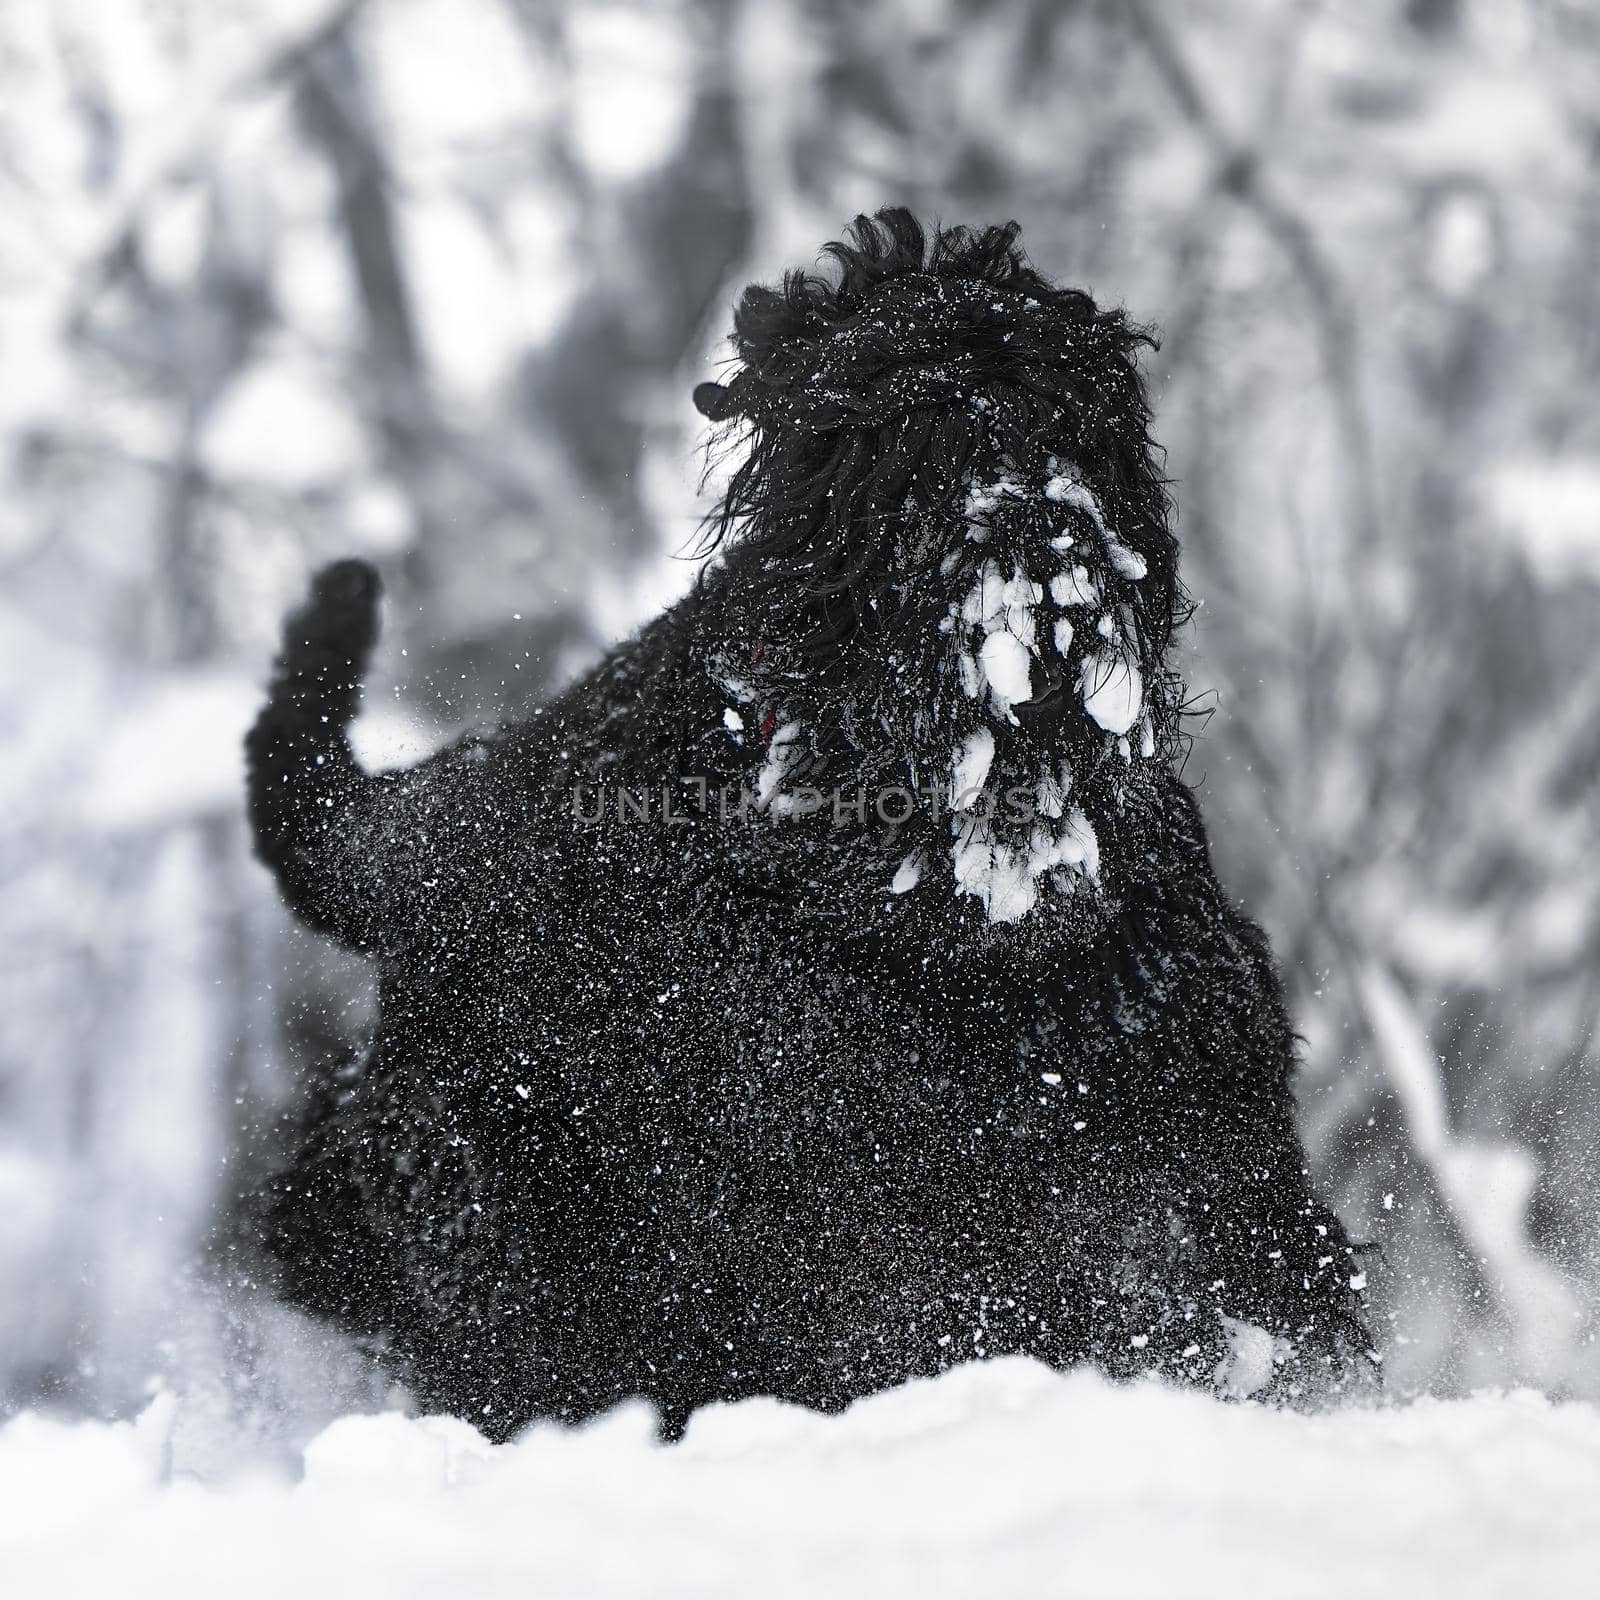 Happy black long-haired dog in the snow. The big dog is glad of the snow. A black dog in the snow. Russian black terrier walking in a snowy park. What happens if you walk your dog in winter.